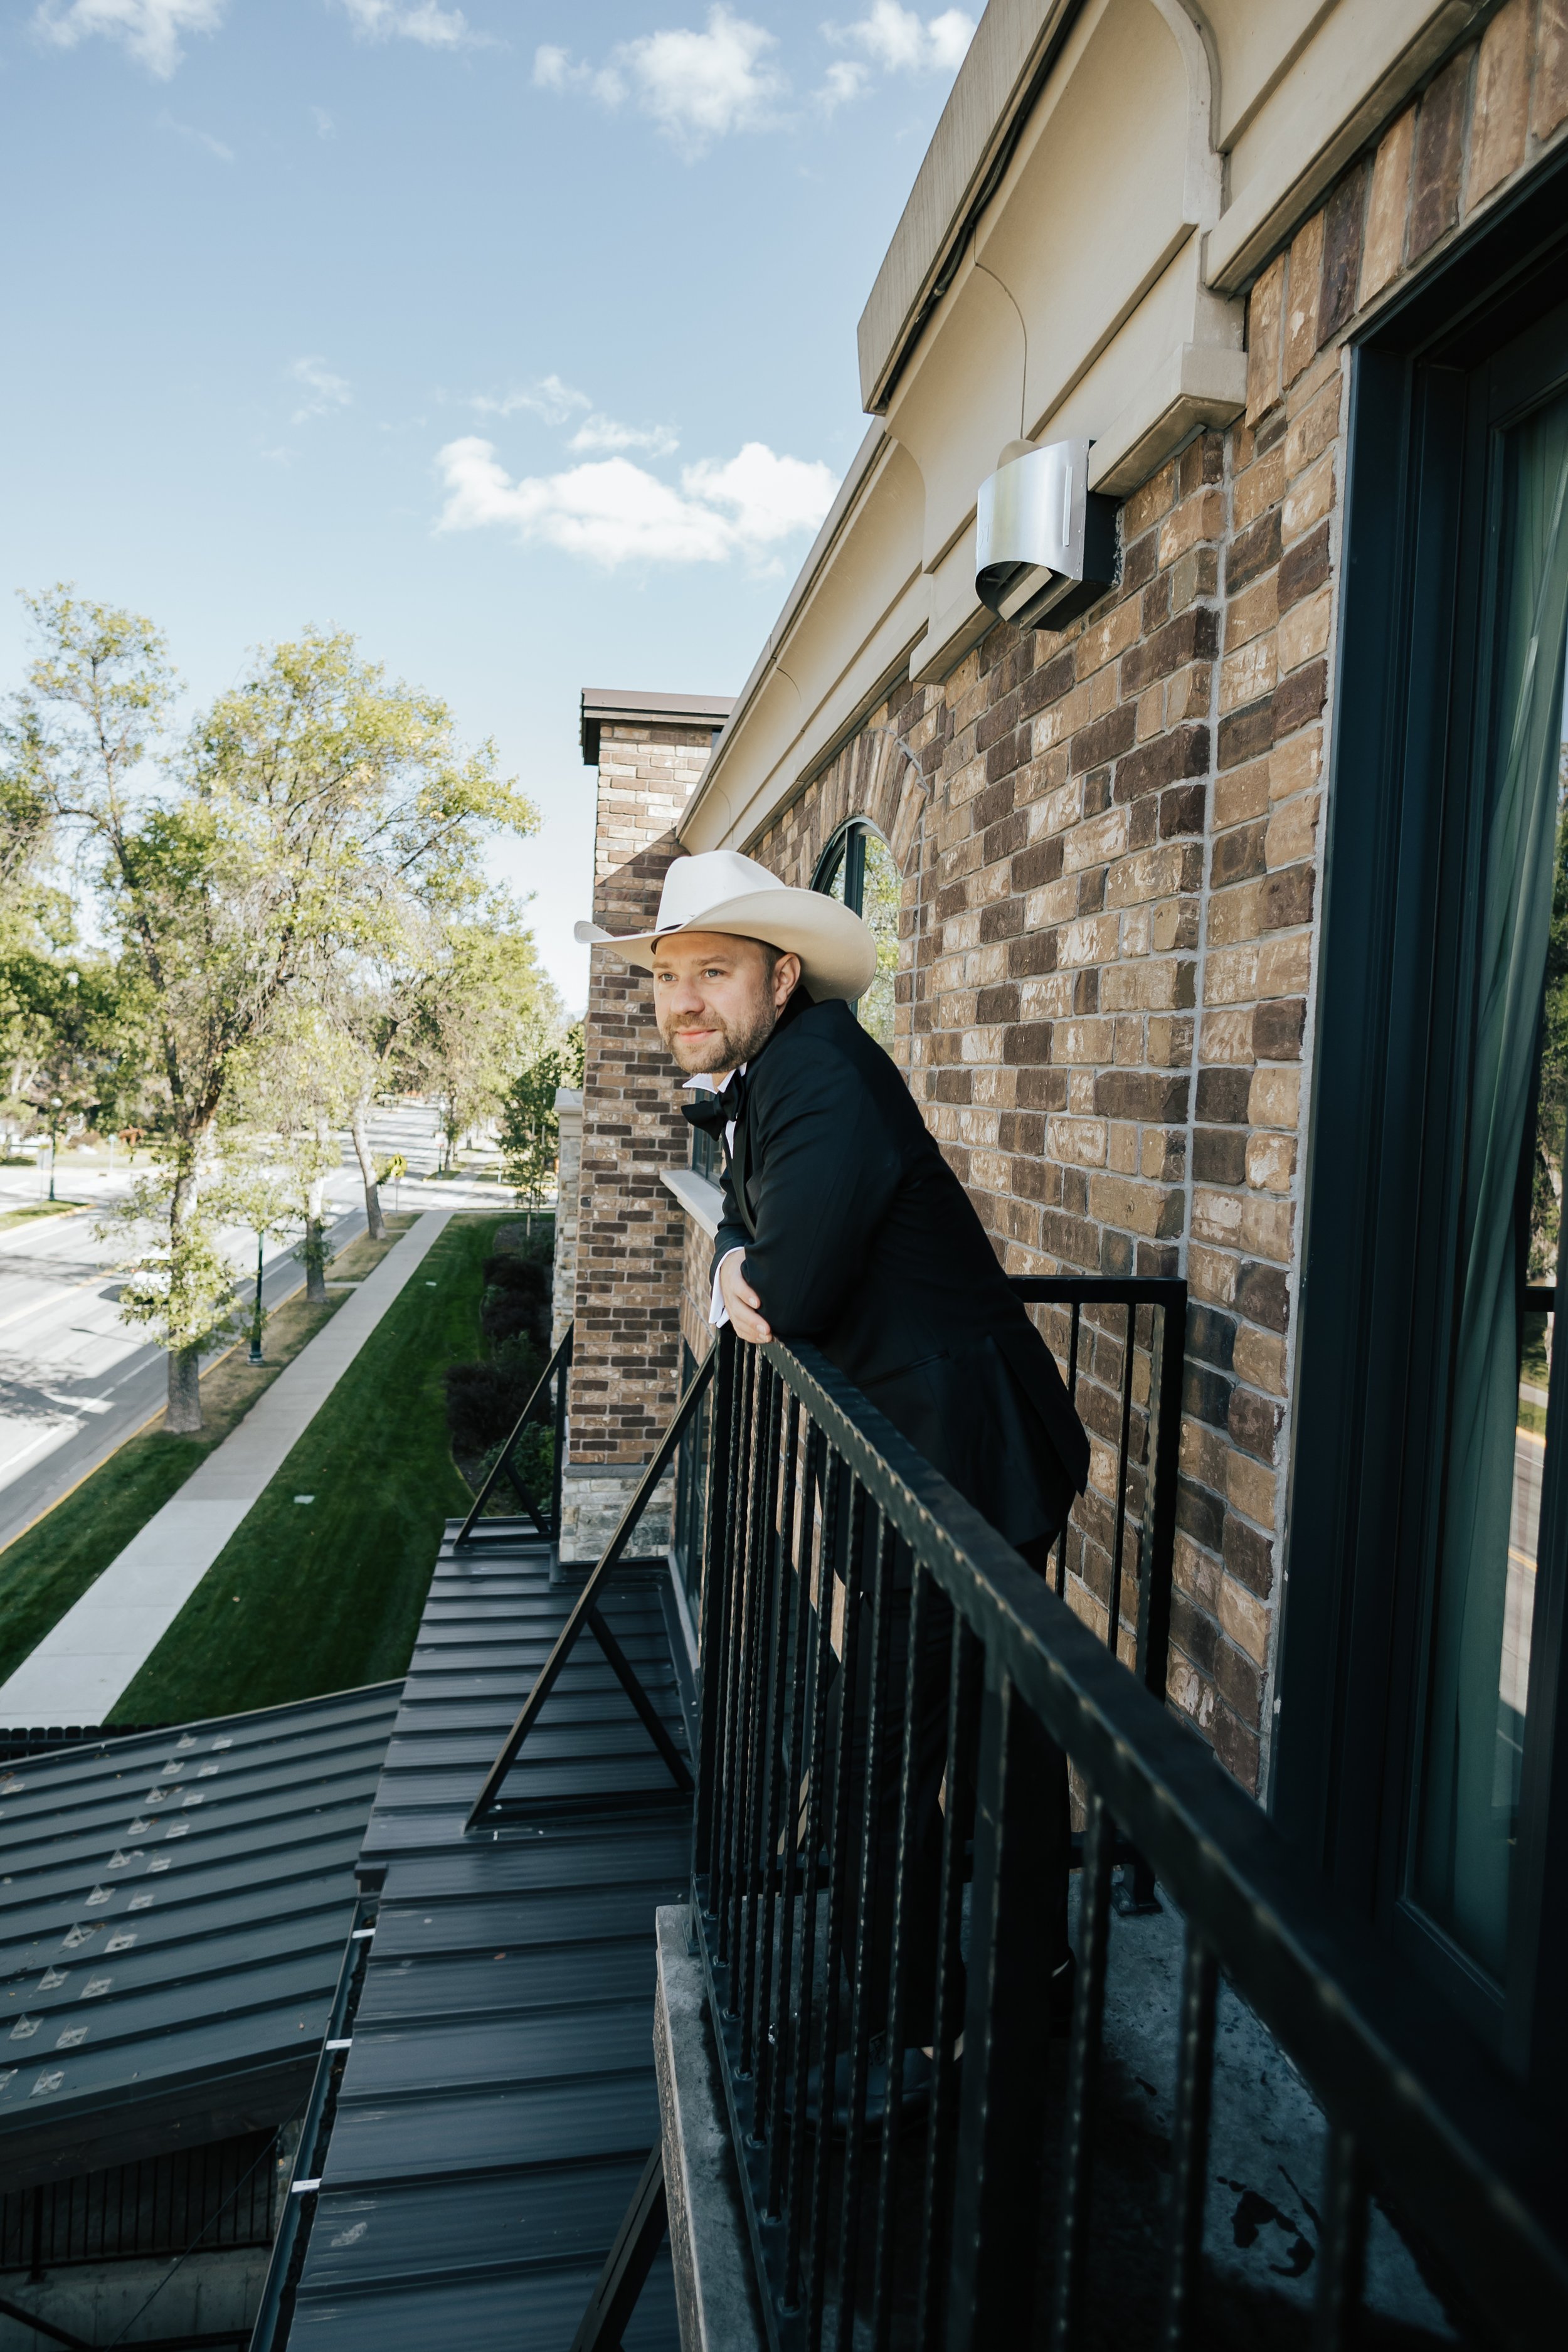  Groom on hotel balcony overlooking the city before the wedding ceremony begins in Whitefish, Montana. Groom in cowboy hat. #groom #weddingphotography 